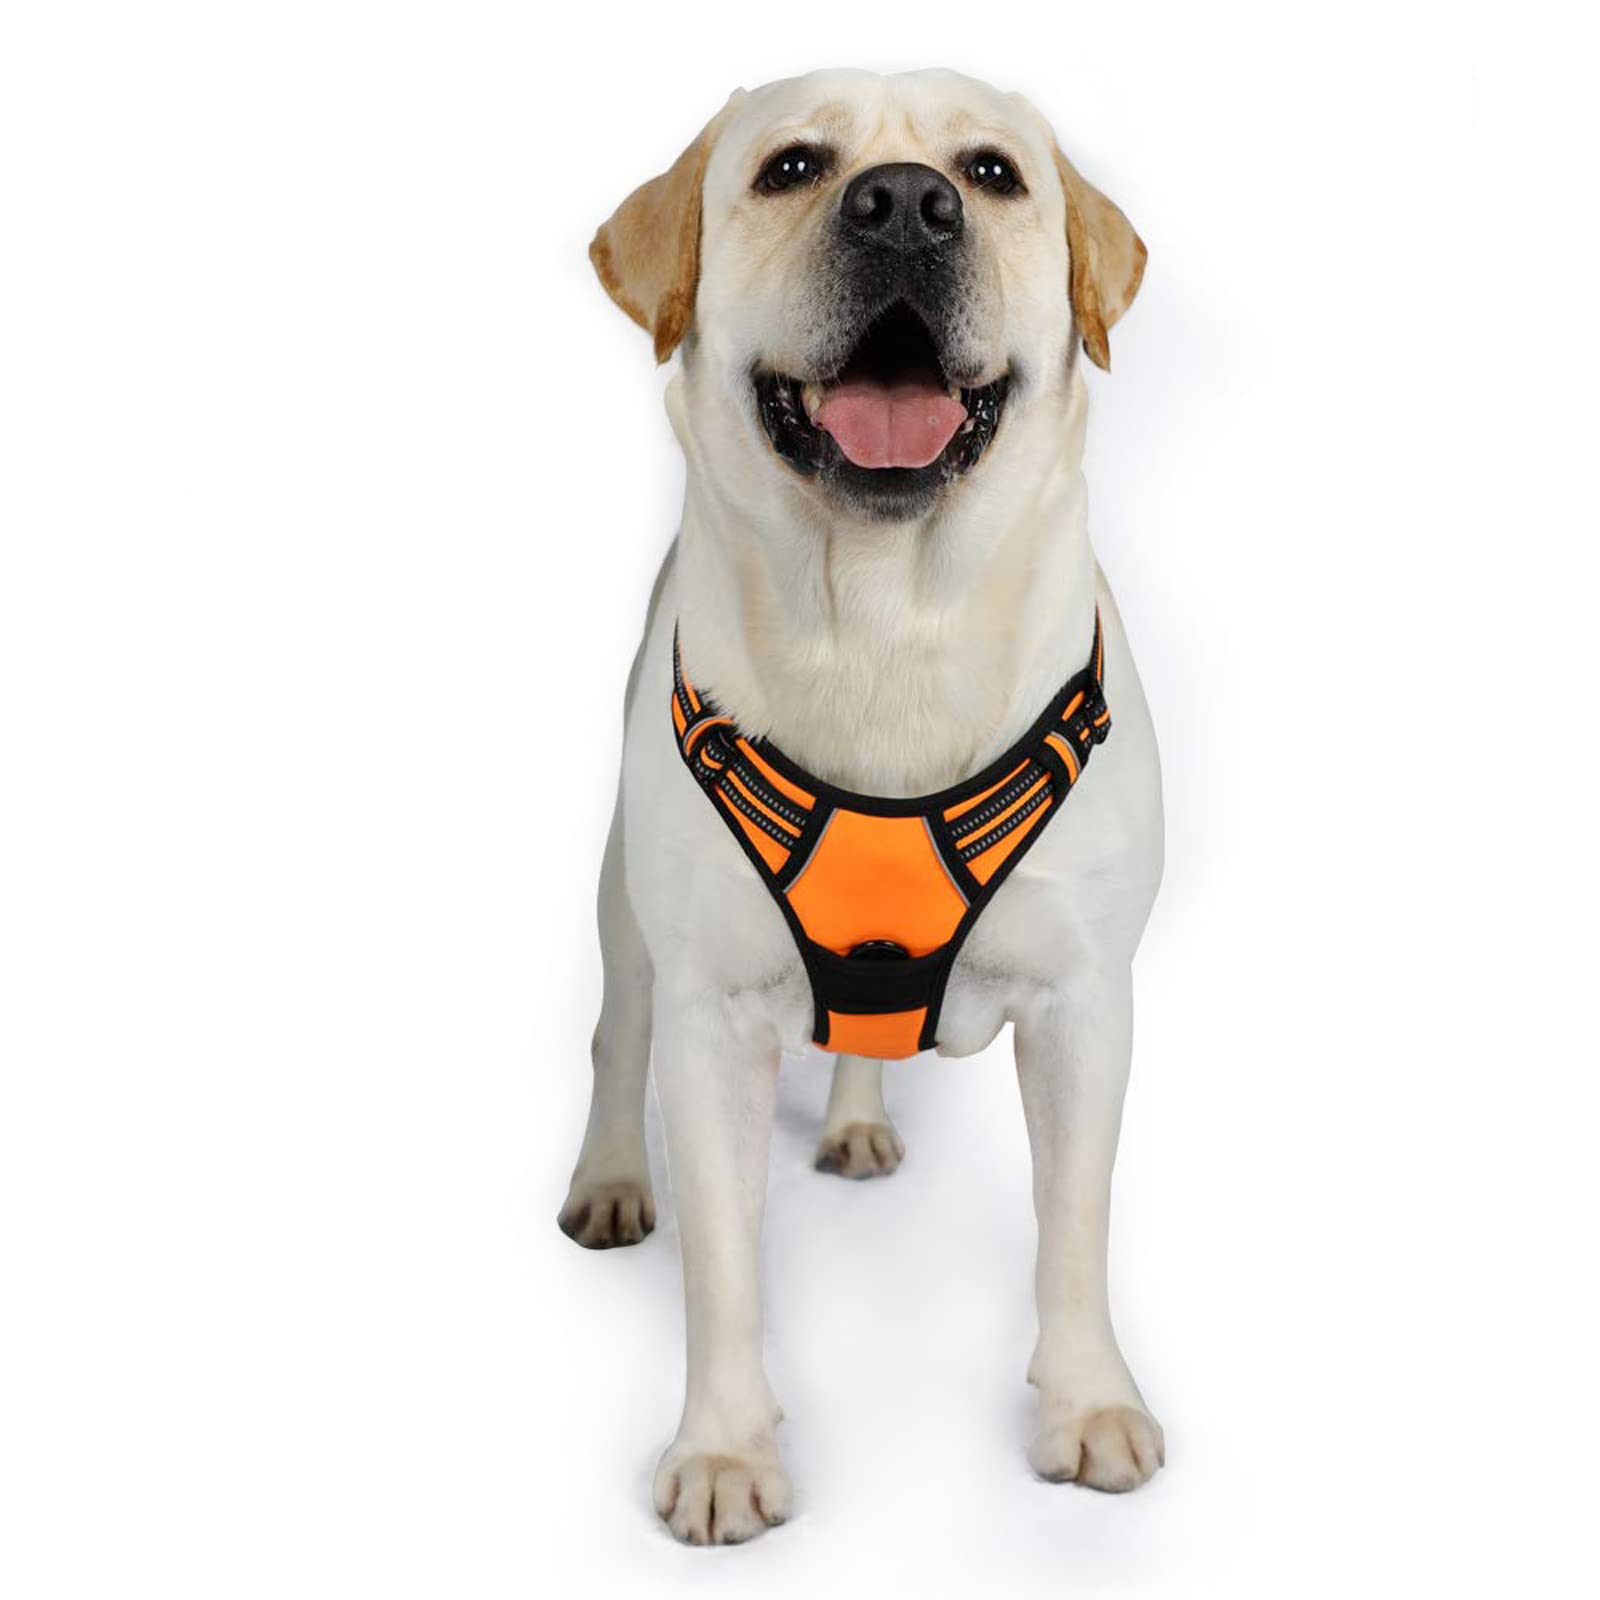 rabbitgoo Dog Harness, No-Pull Pet Harness with 2 Leash Clips, Adjustable Soft Padded Dog Vest, Reflective No-Choke Pet Oxford Vest with Easy Control Handle for Large Dogs, Orange, XL